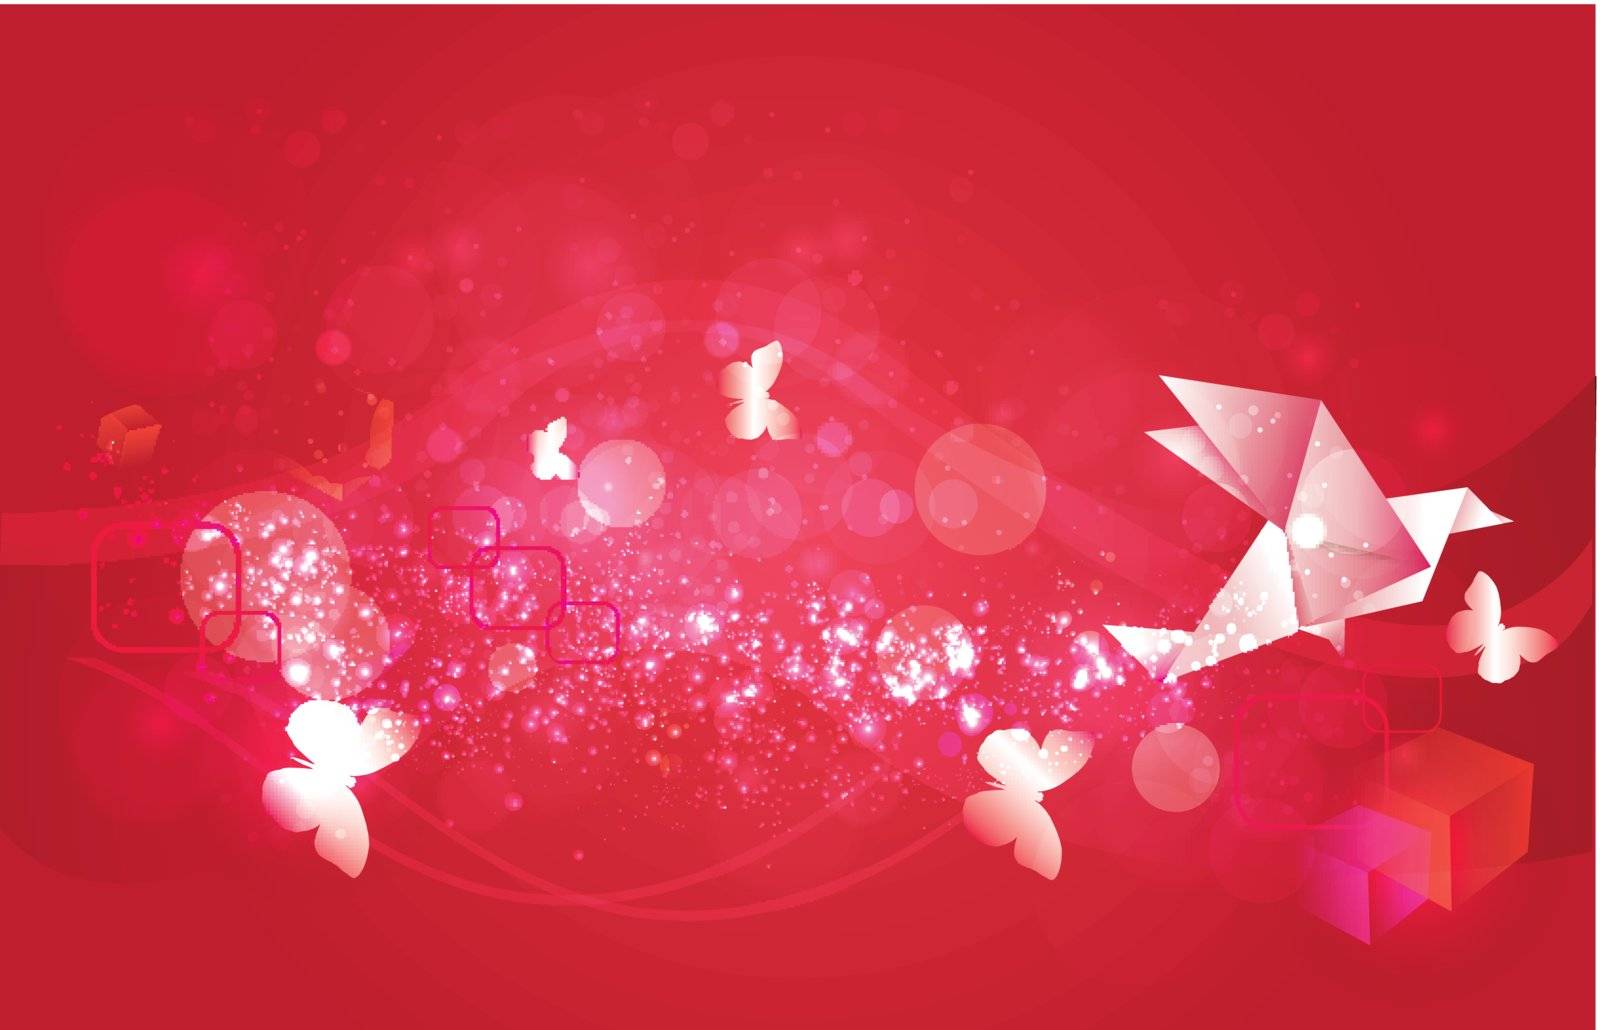 Origami Background(red) vector